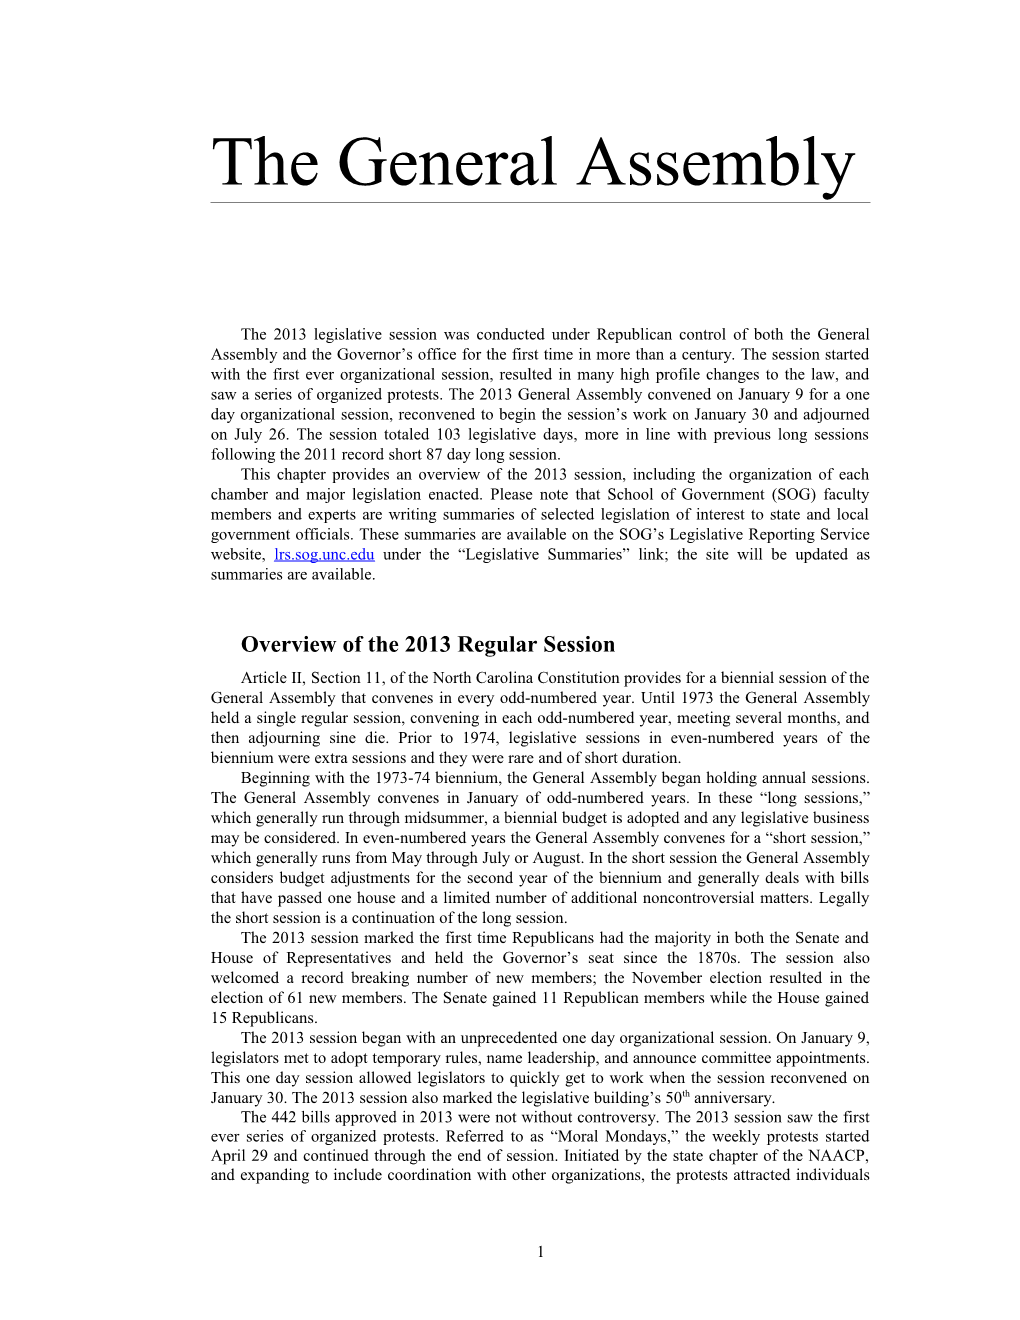 The General Assembly 2013 9